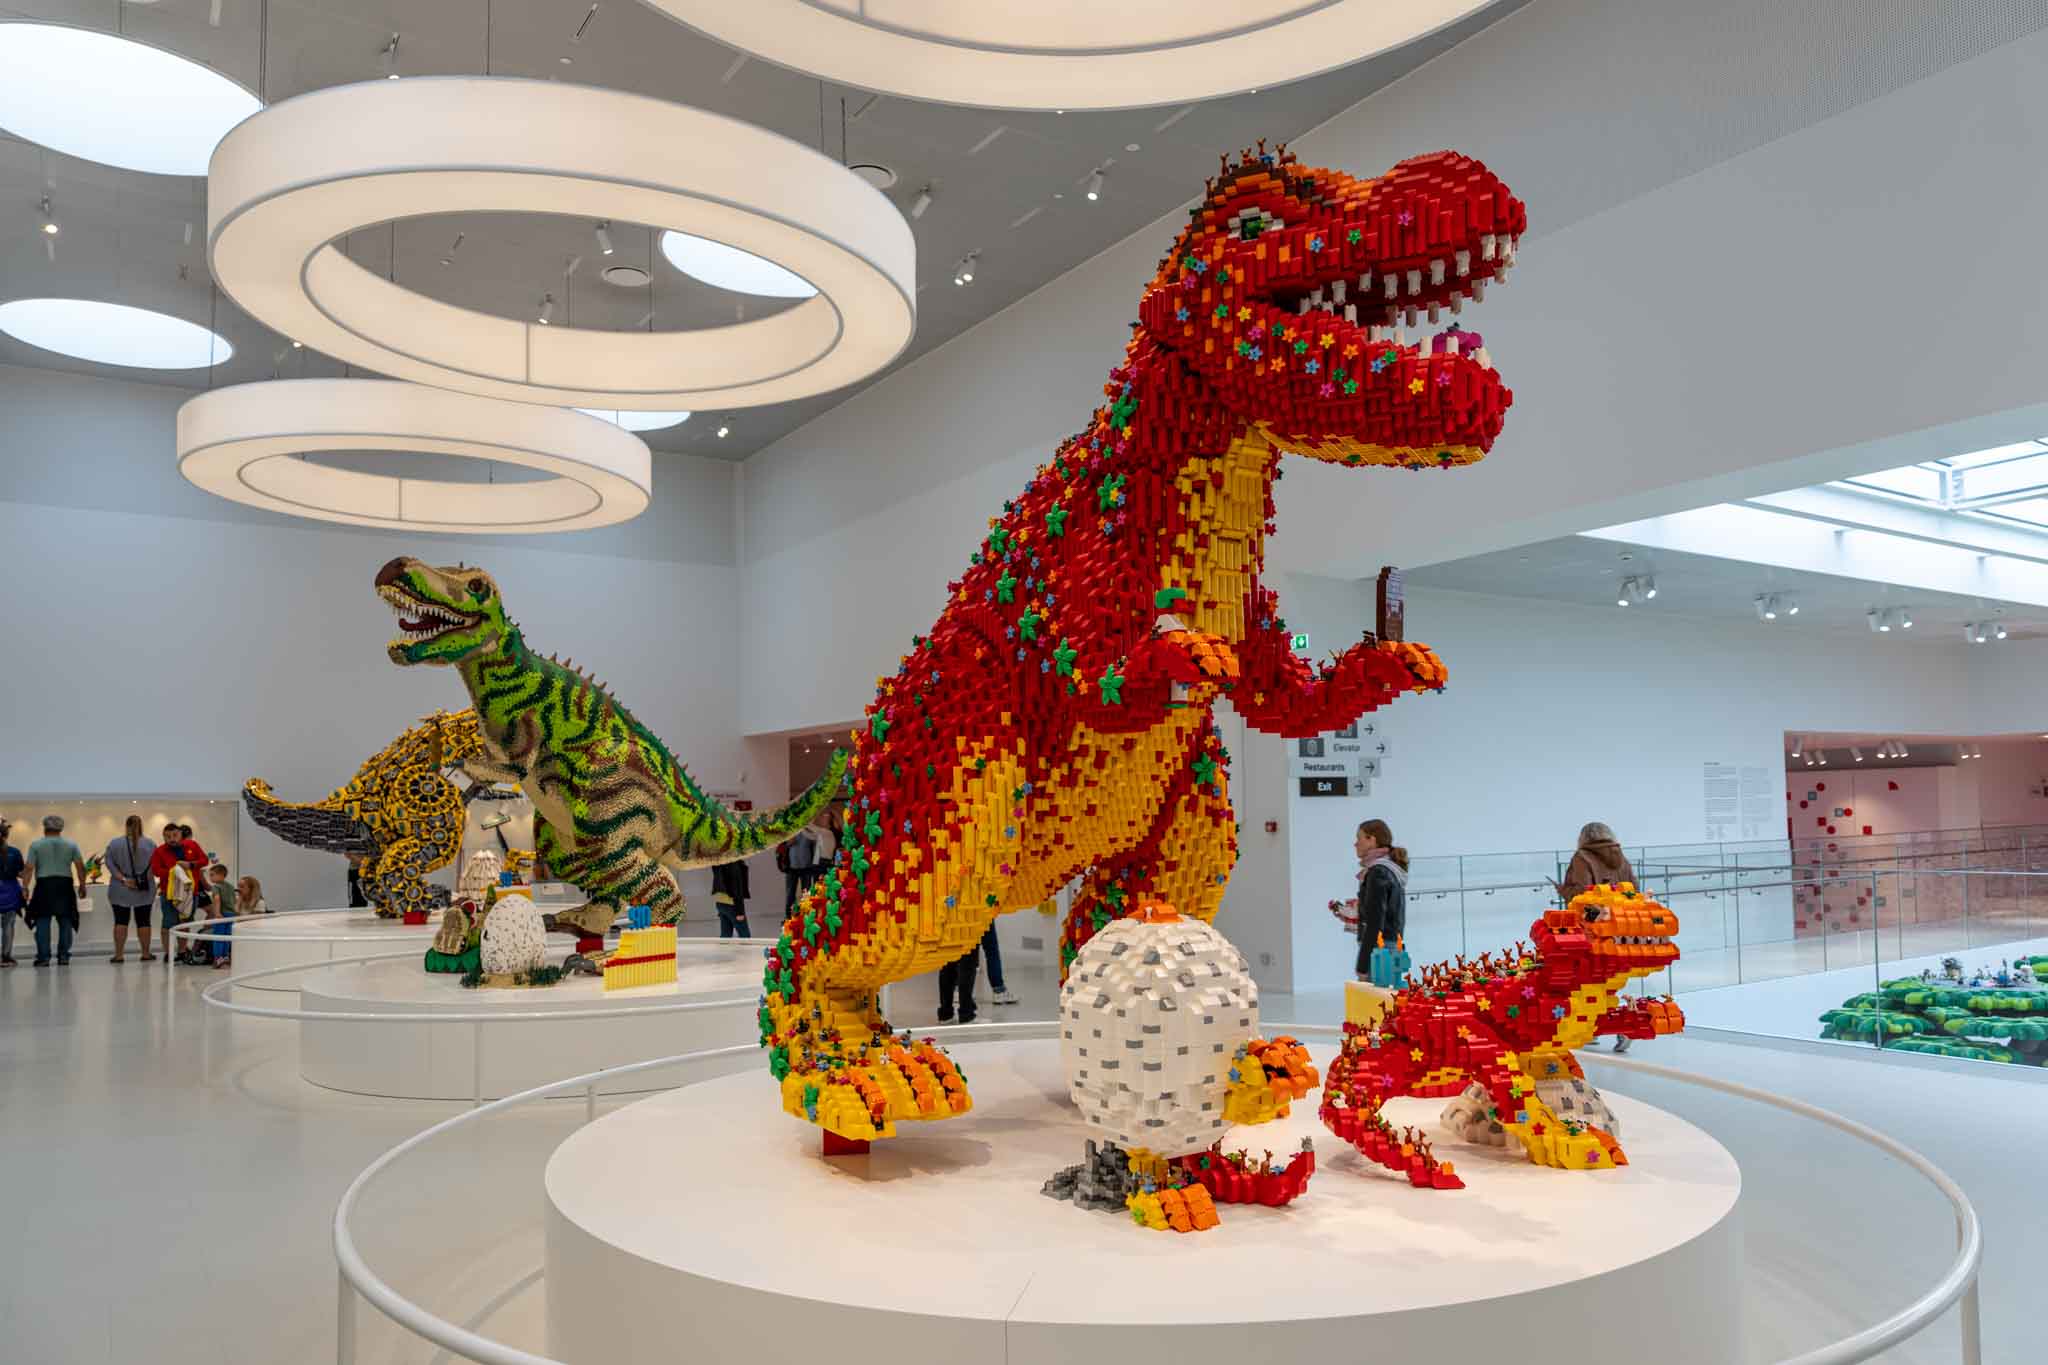 a group of dinosaurs made out of lego blocks